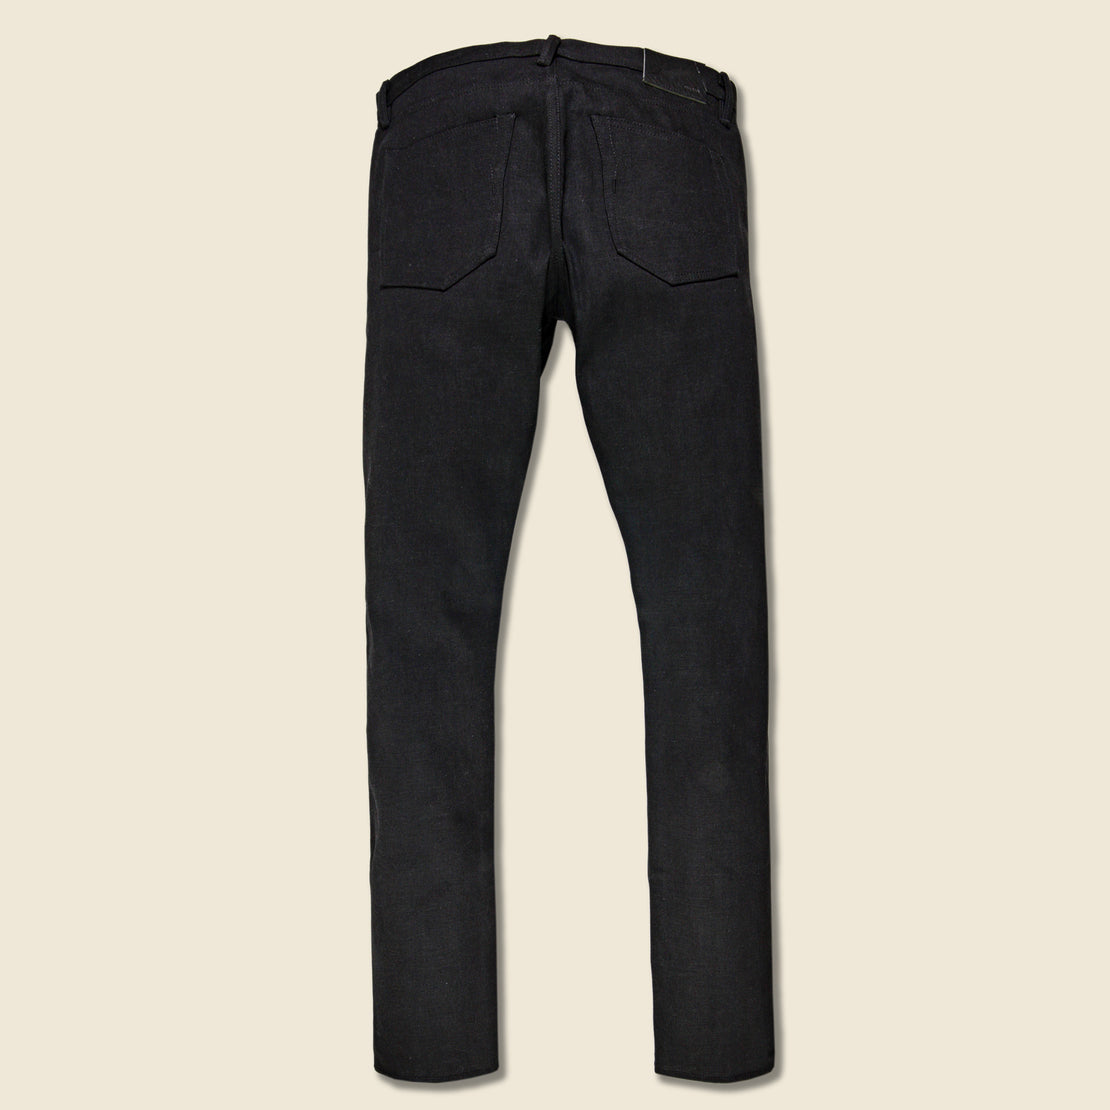 SK 15oz - Stealth Black - Rogue Territory - STAG Provisions - Pants - Denim